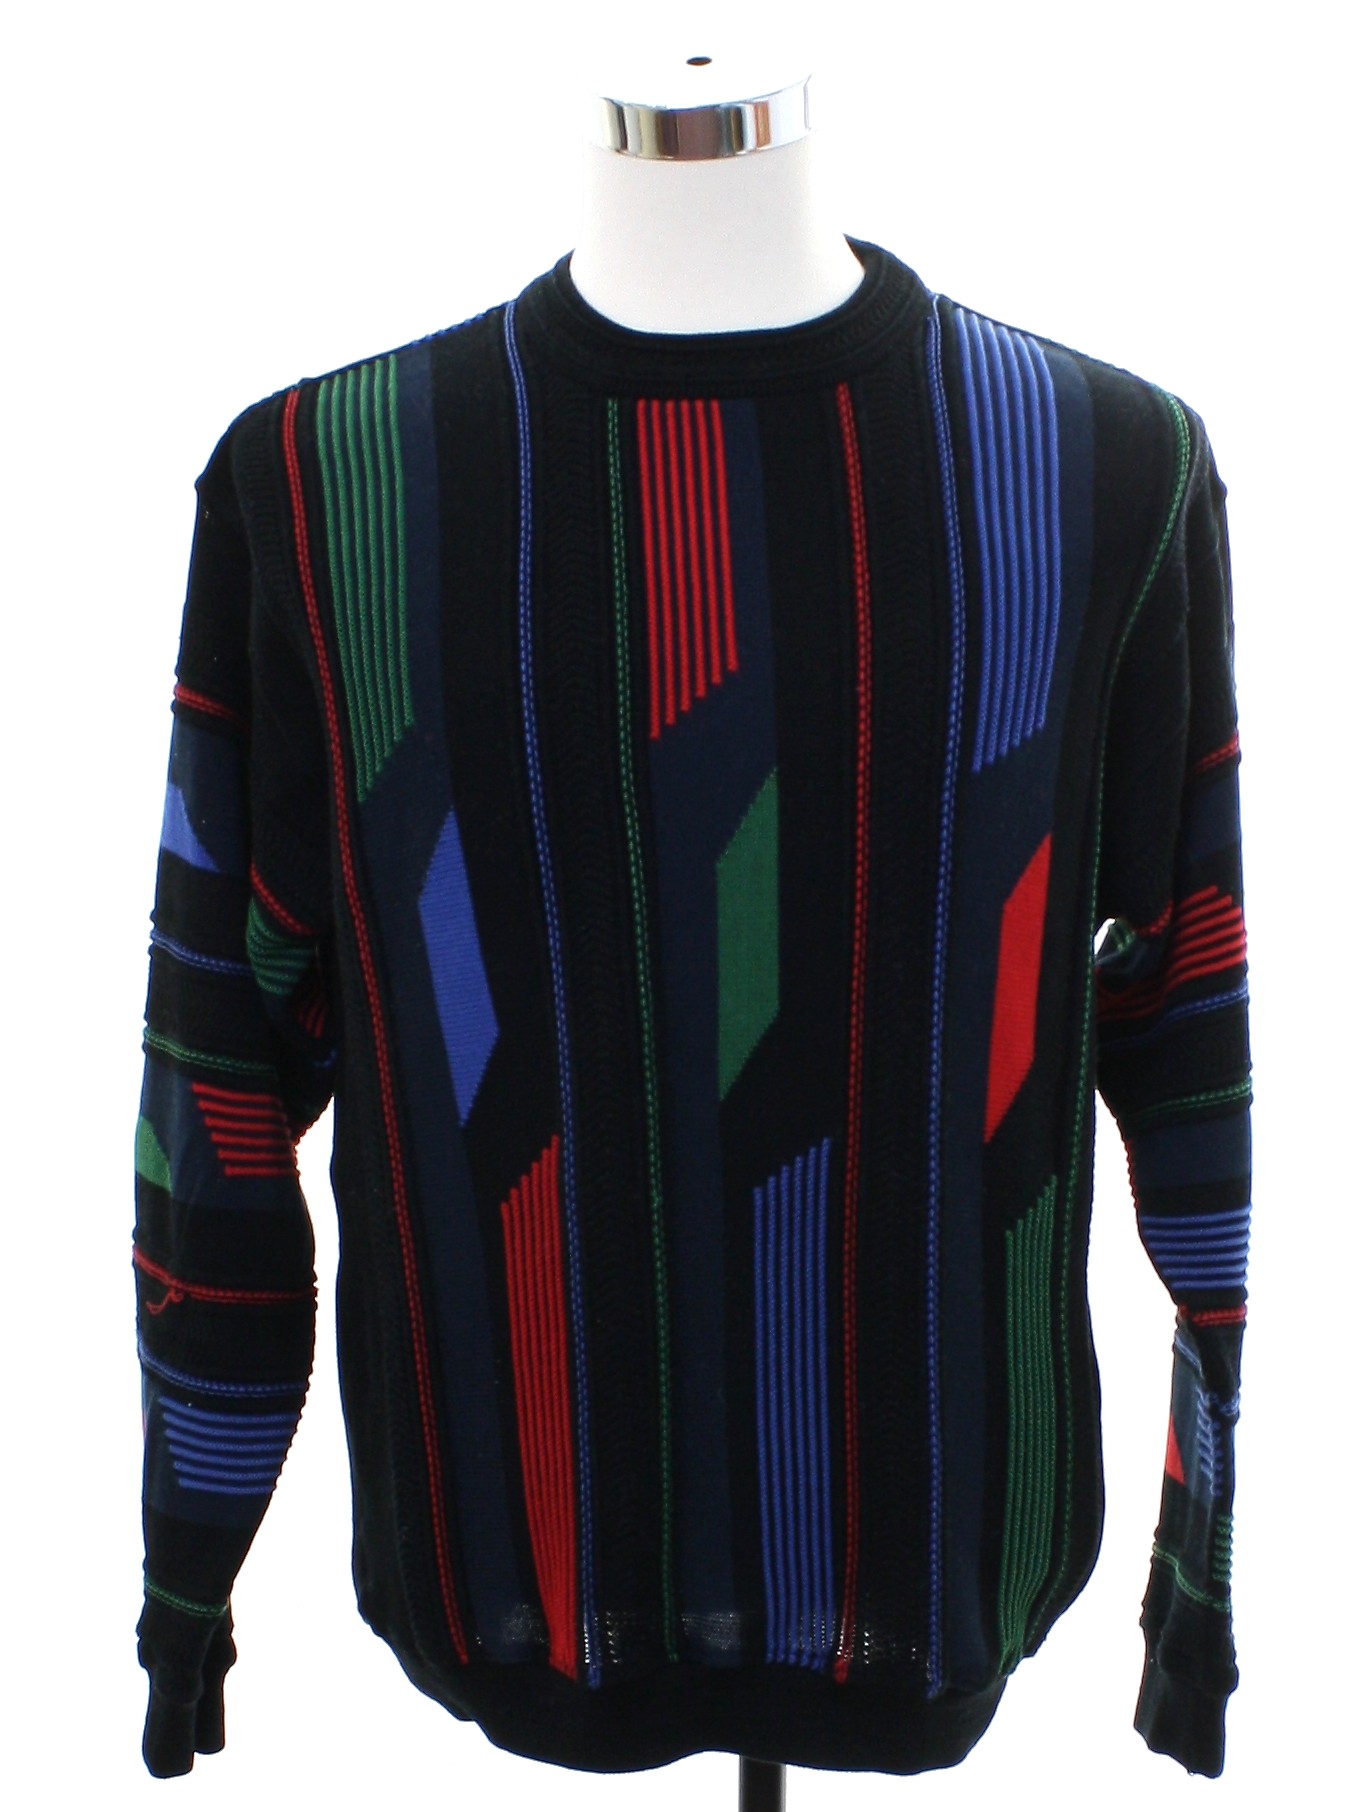 1980's Vintage Sweater: Late 80s or Early 90s -No Label- Mens black ...